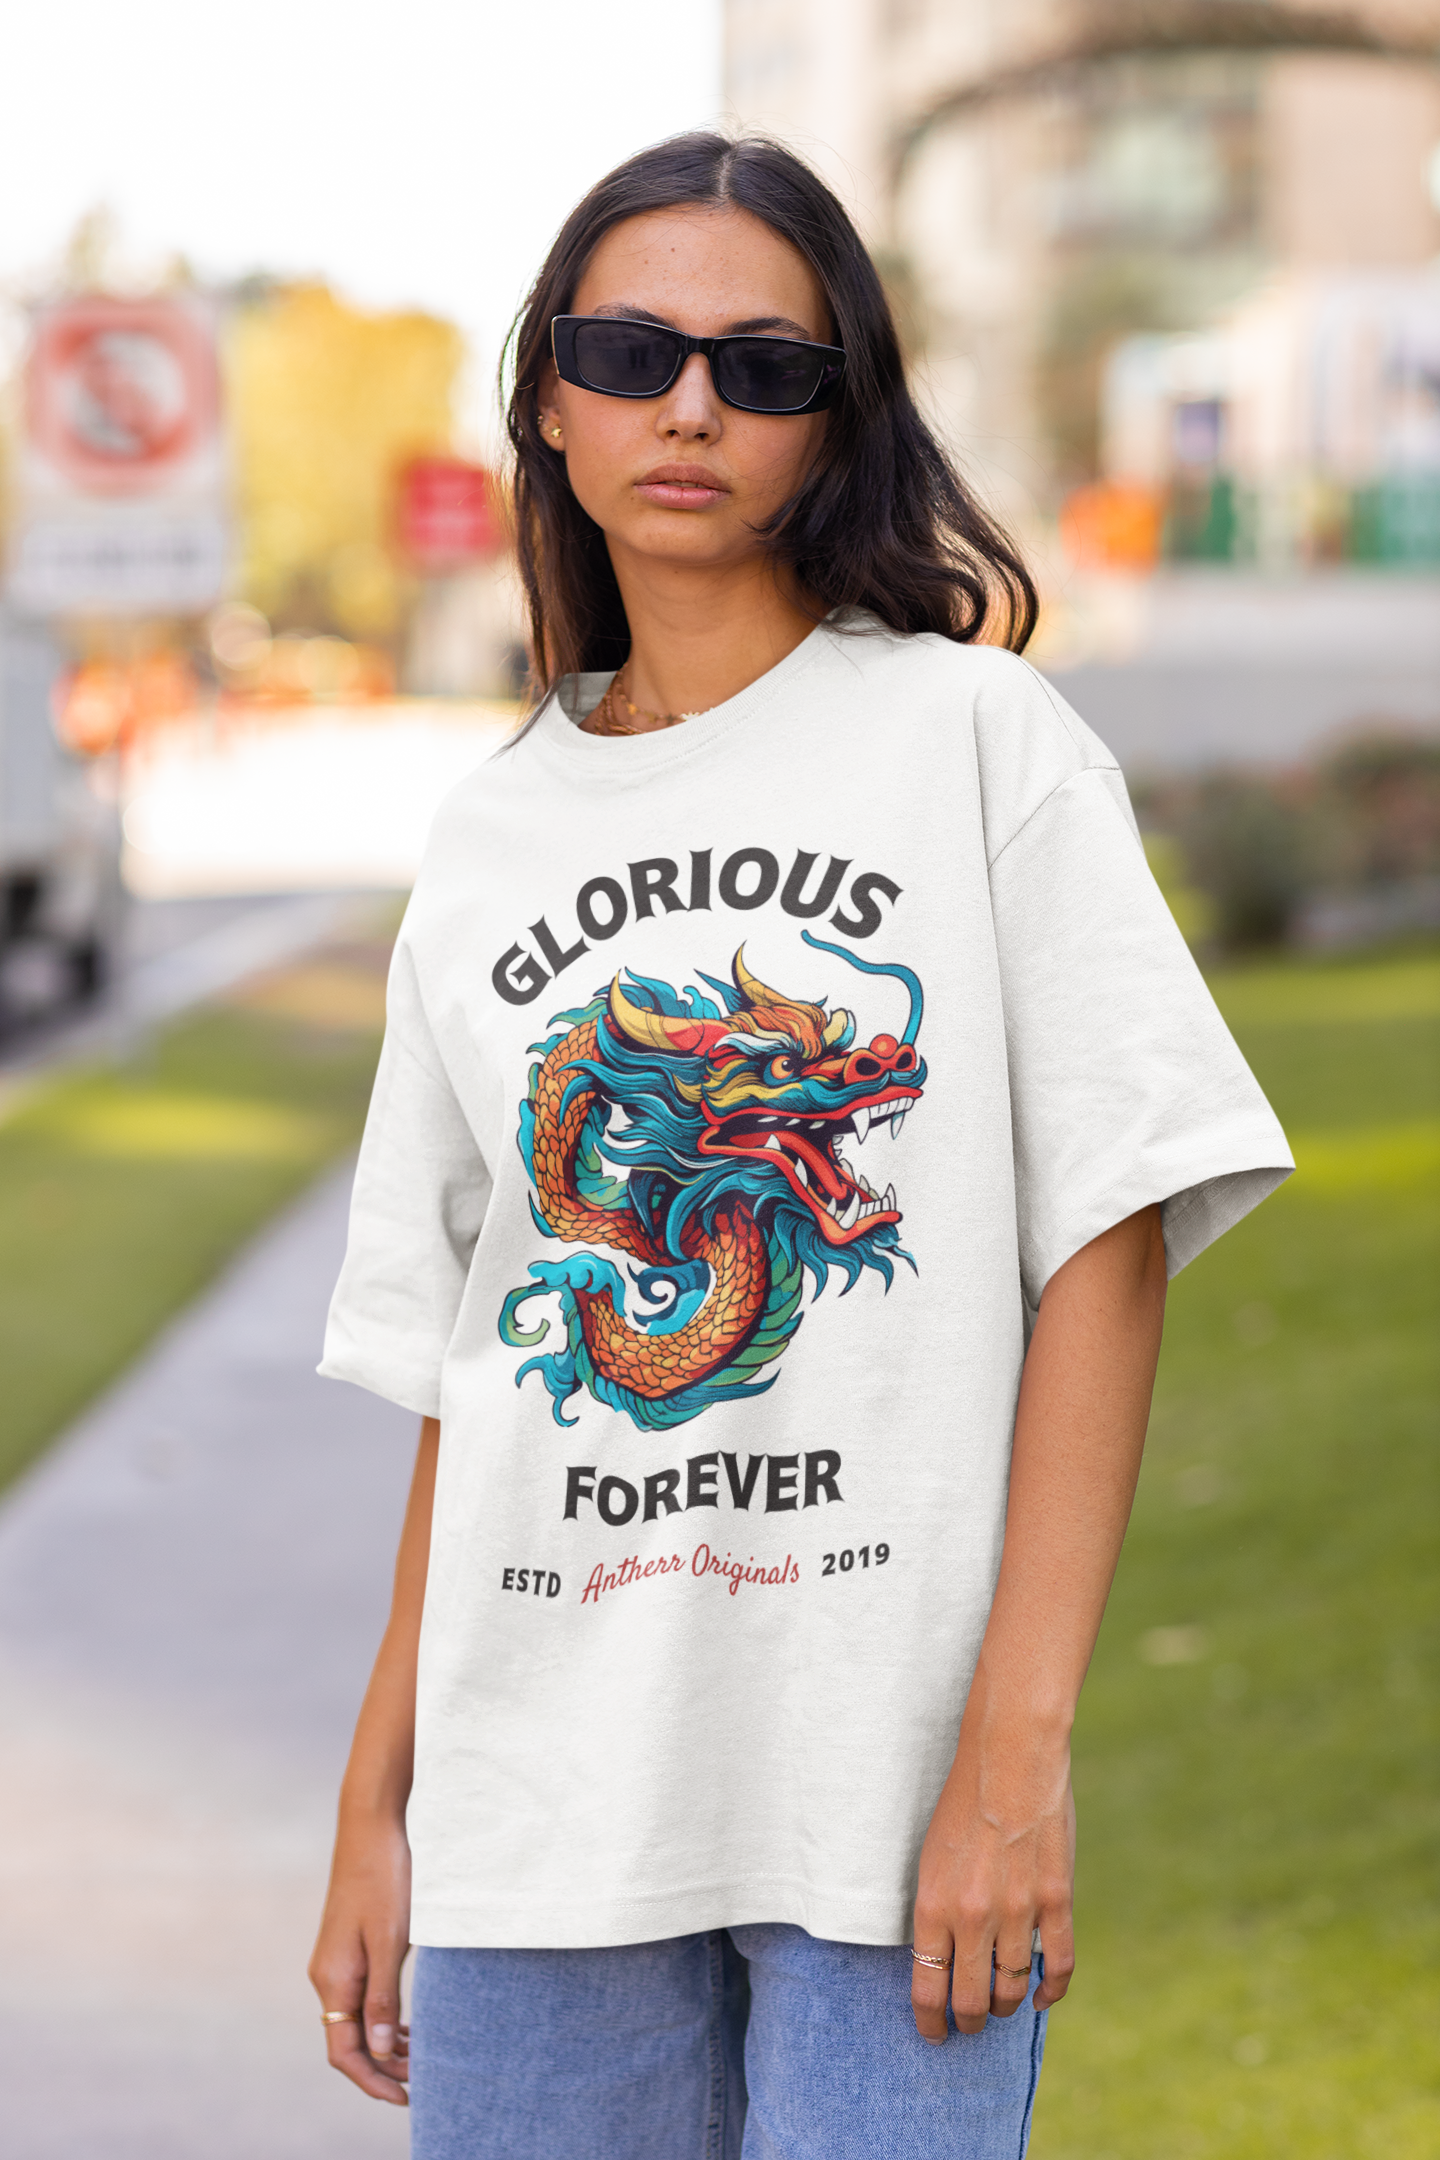 Glorious Forever: Oversized T-Shirts WHITE